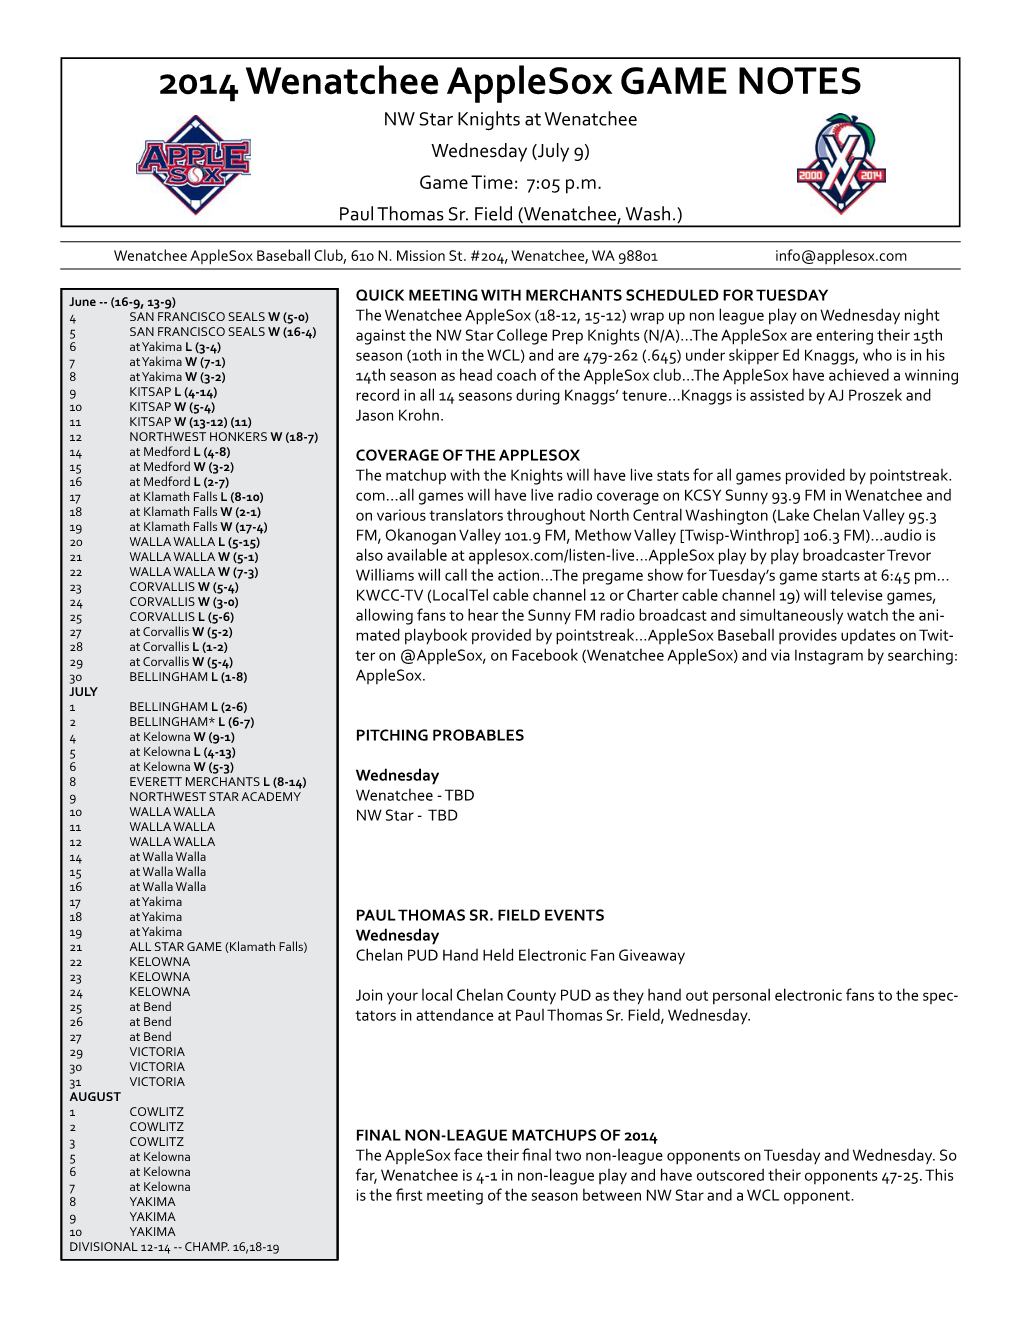 2014 Wenatchee Applesox GAME NOTES NW Star Knights at Wenatchee Wednesday (July 9) Game Time: 7:05 P.M